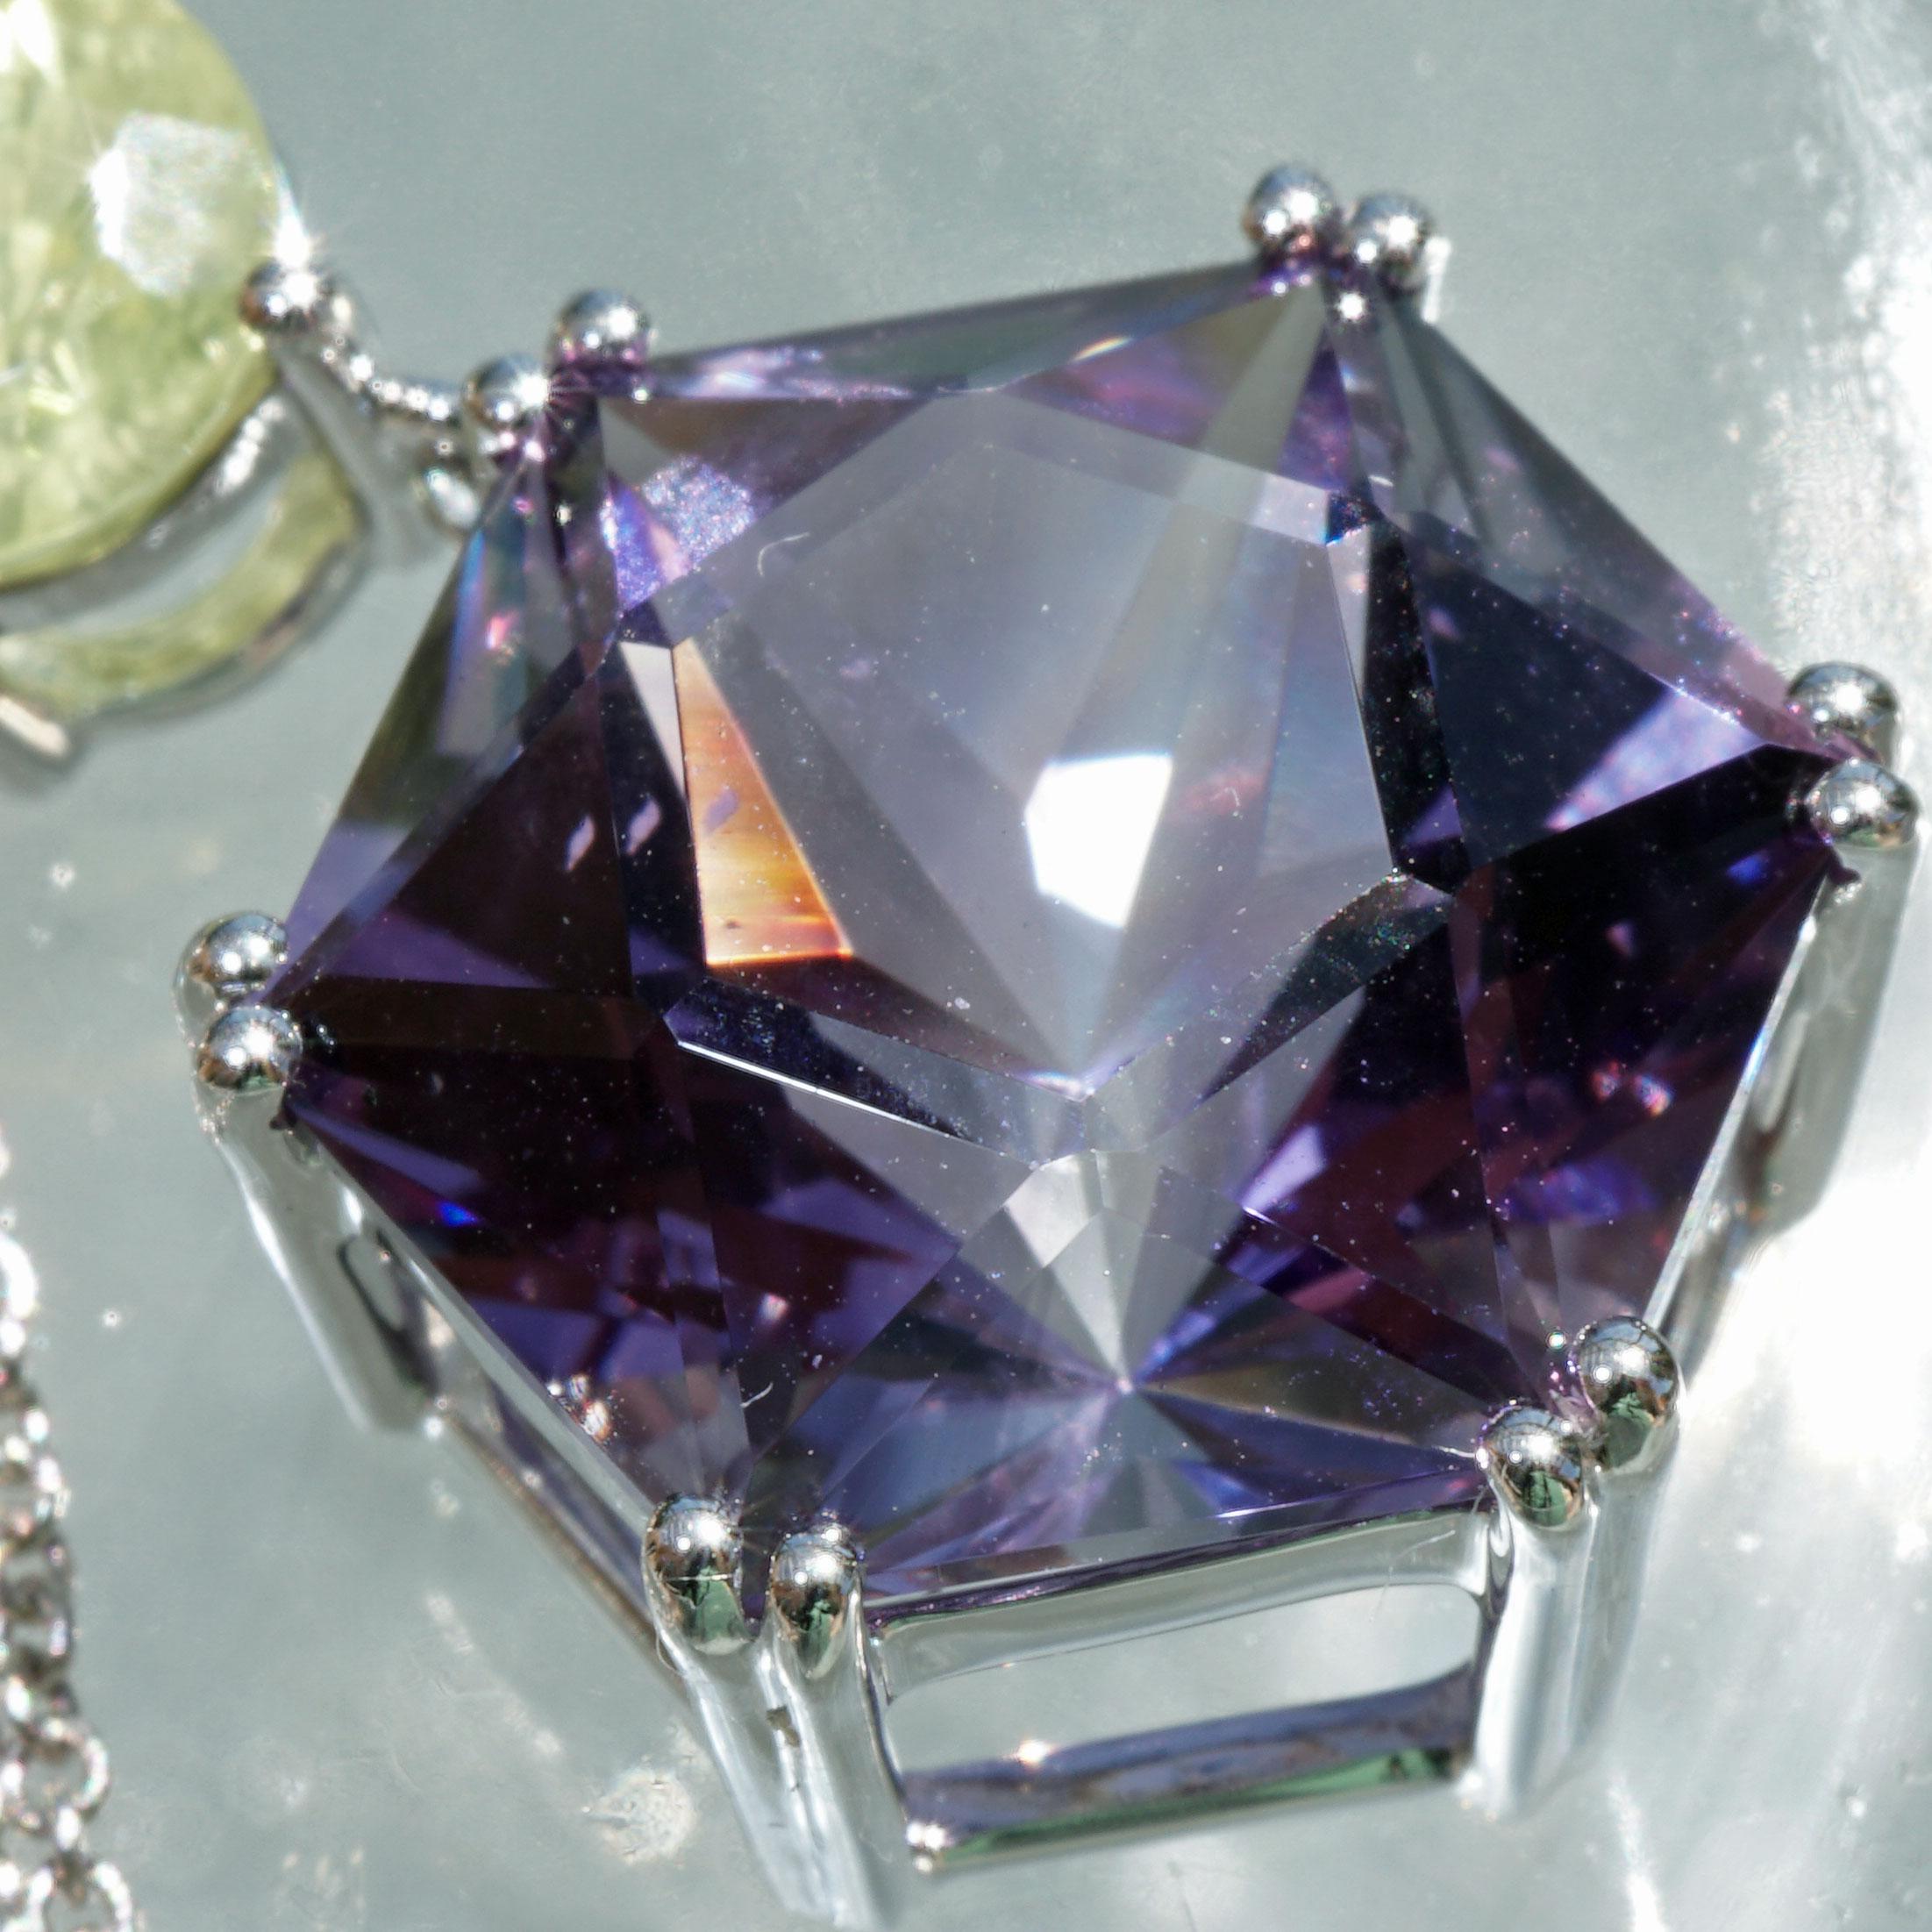 a rare color combination, neon yellow and violet in star shape, puristic and rare, results in an incredibly beautiful white gold pendant, a round facetted chrysoberyl approx. 1.41 ct, AA, natural growth characteristics, transparent, rare natural